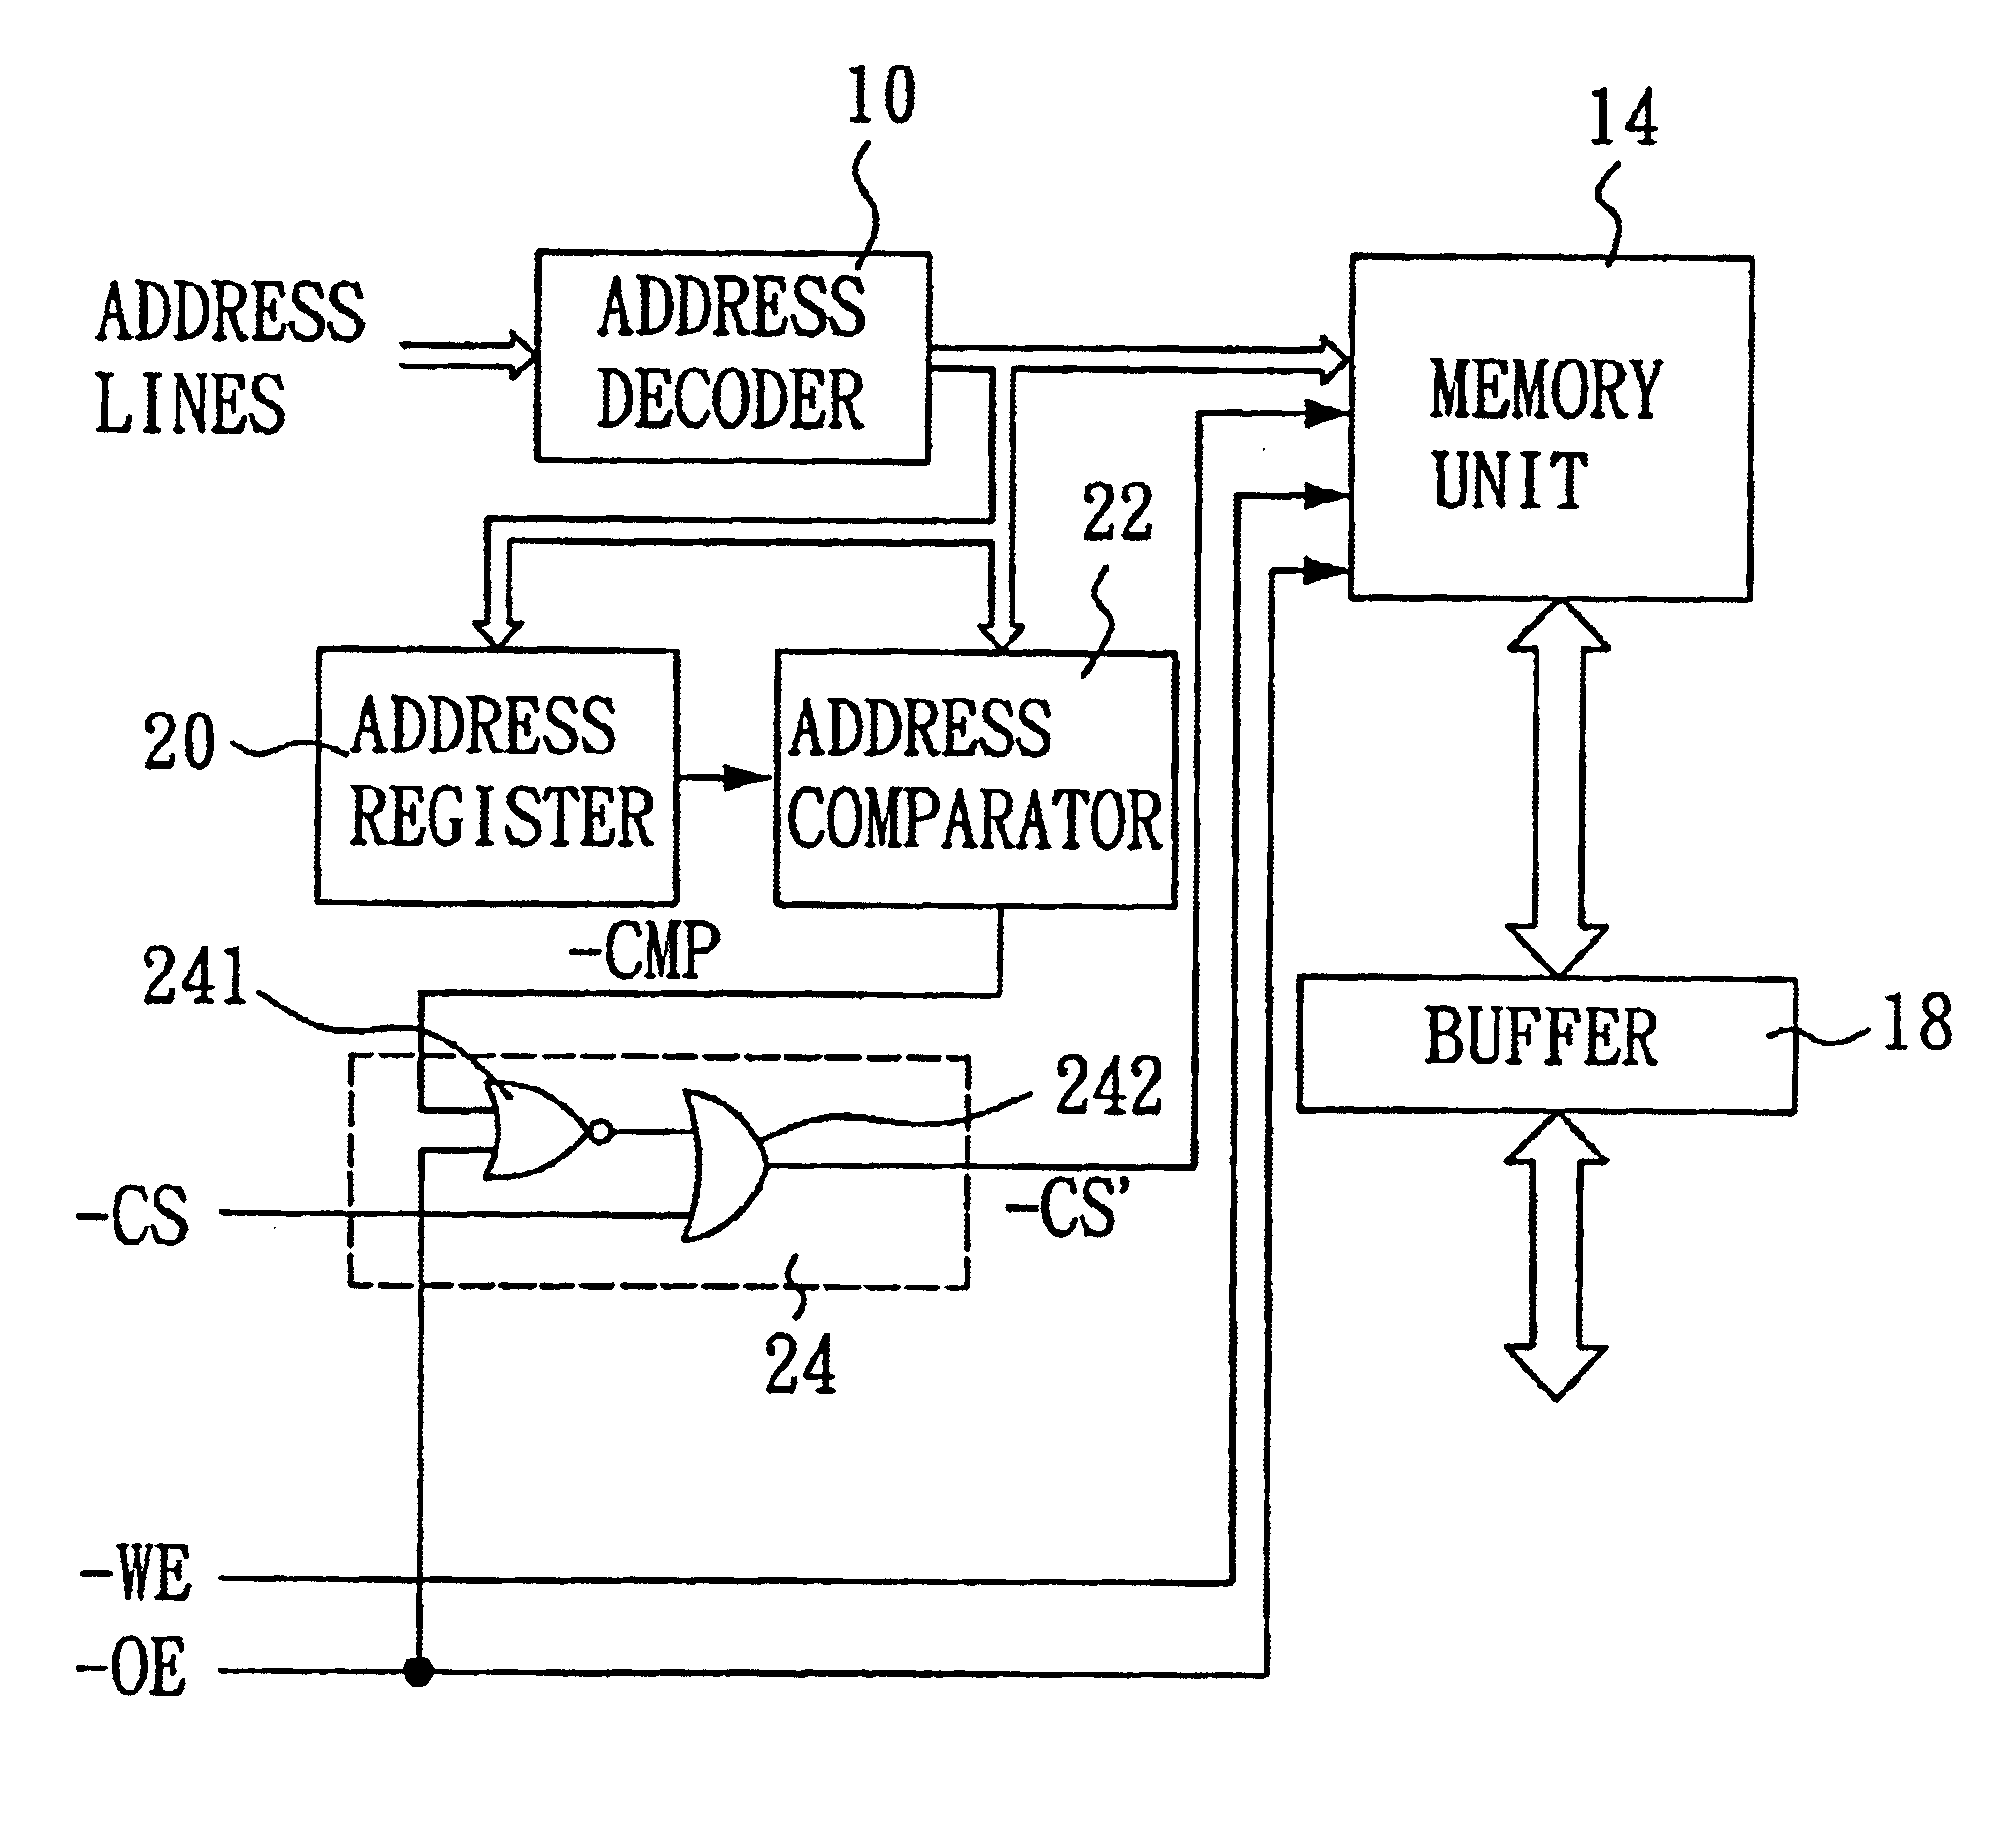 SRAM control circuit with a power saving function